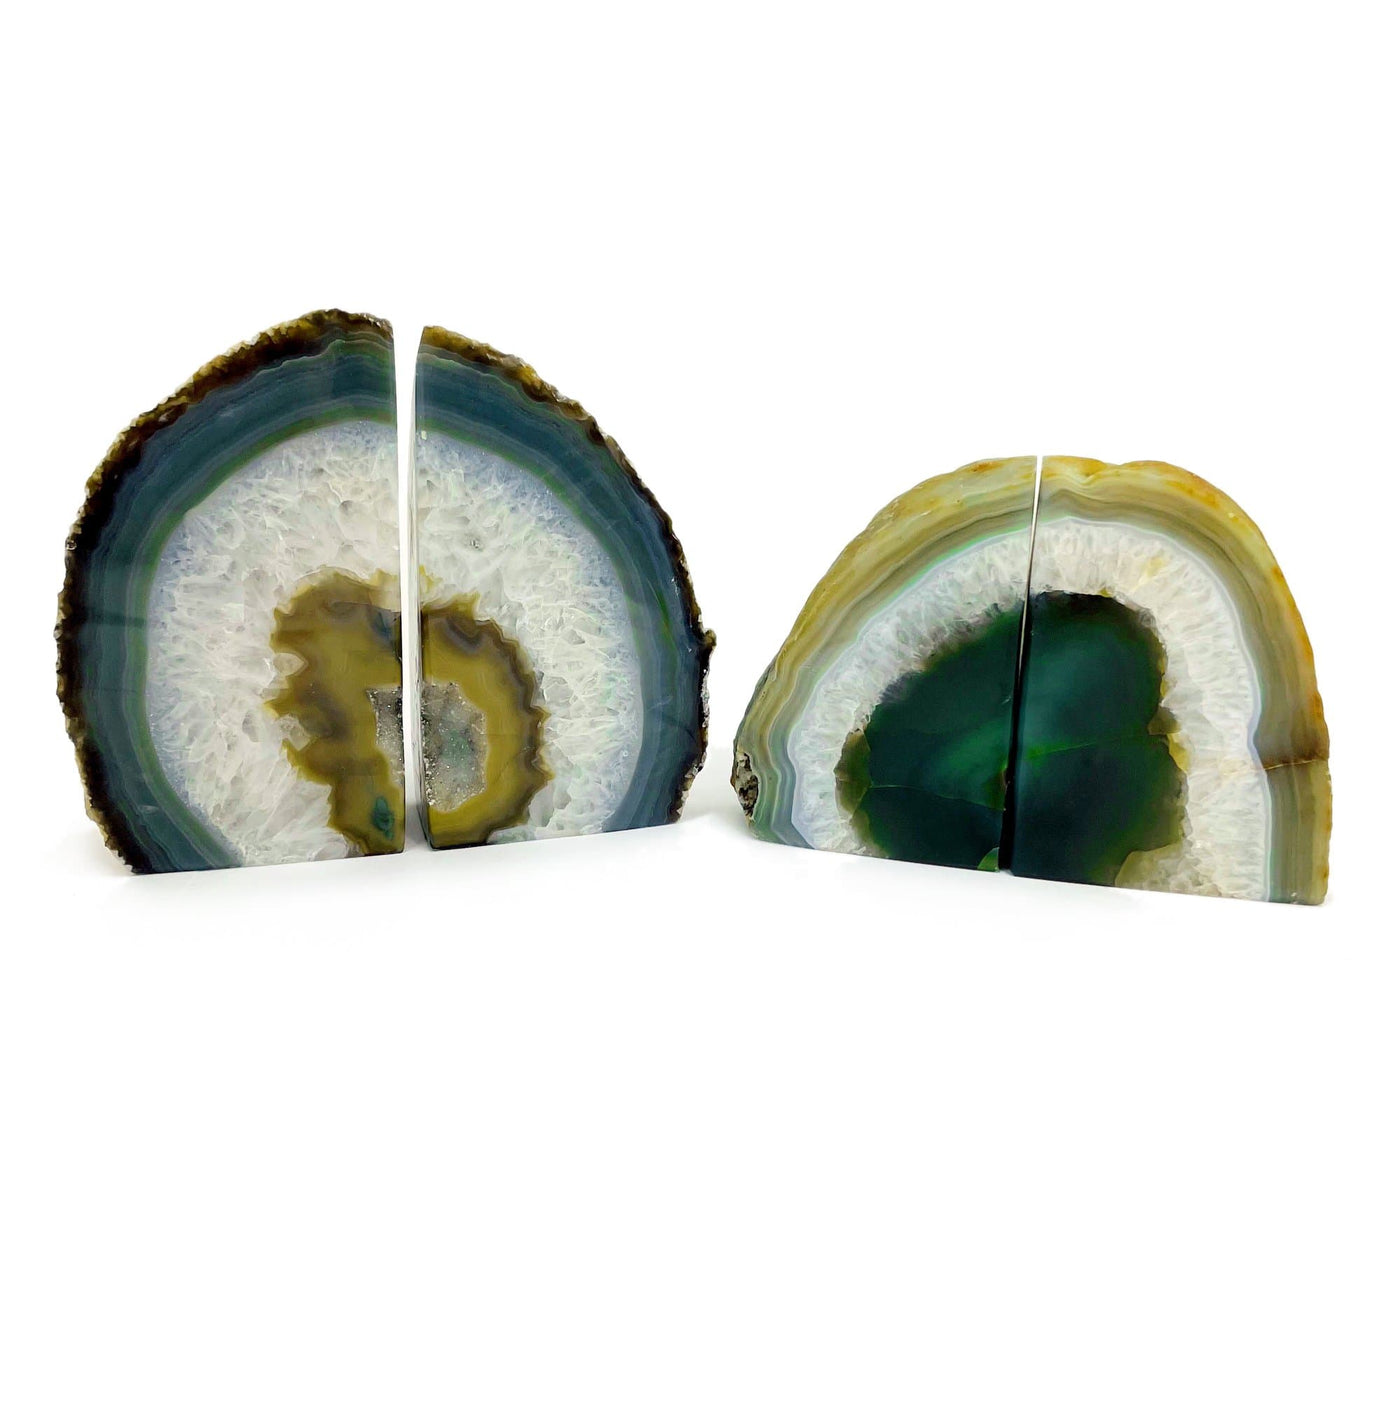 Green Agate Bookends displayed front facing to show variation in size and pattern.